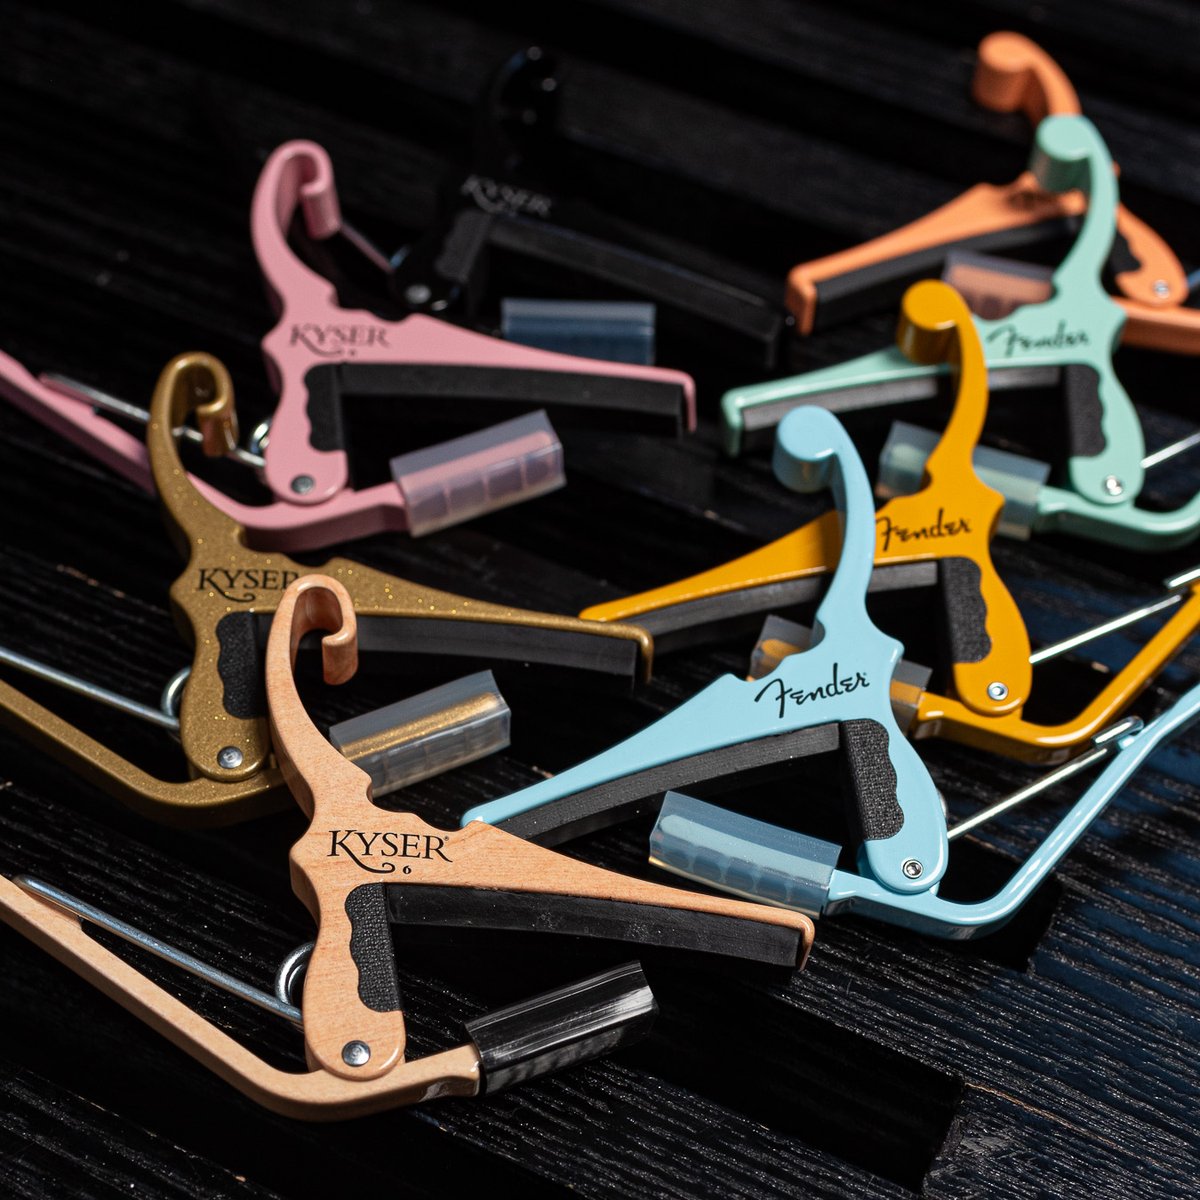 Find a @KyserCapos Quick-Change Capo that matches your style at CME! Using only materials sourced from the United States, Kyser Quick-Change Capos have been handmade in Texas for over 40 years. Shop yours at CME or learn more on our Soundboard Blog today! bit.ly/44fly1v